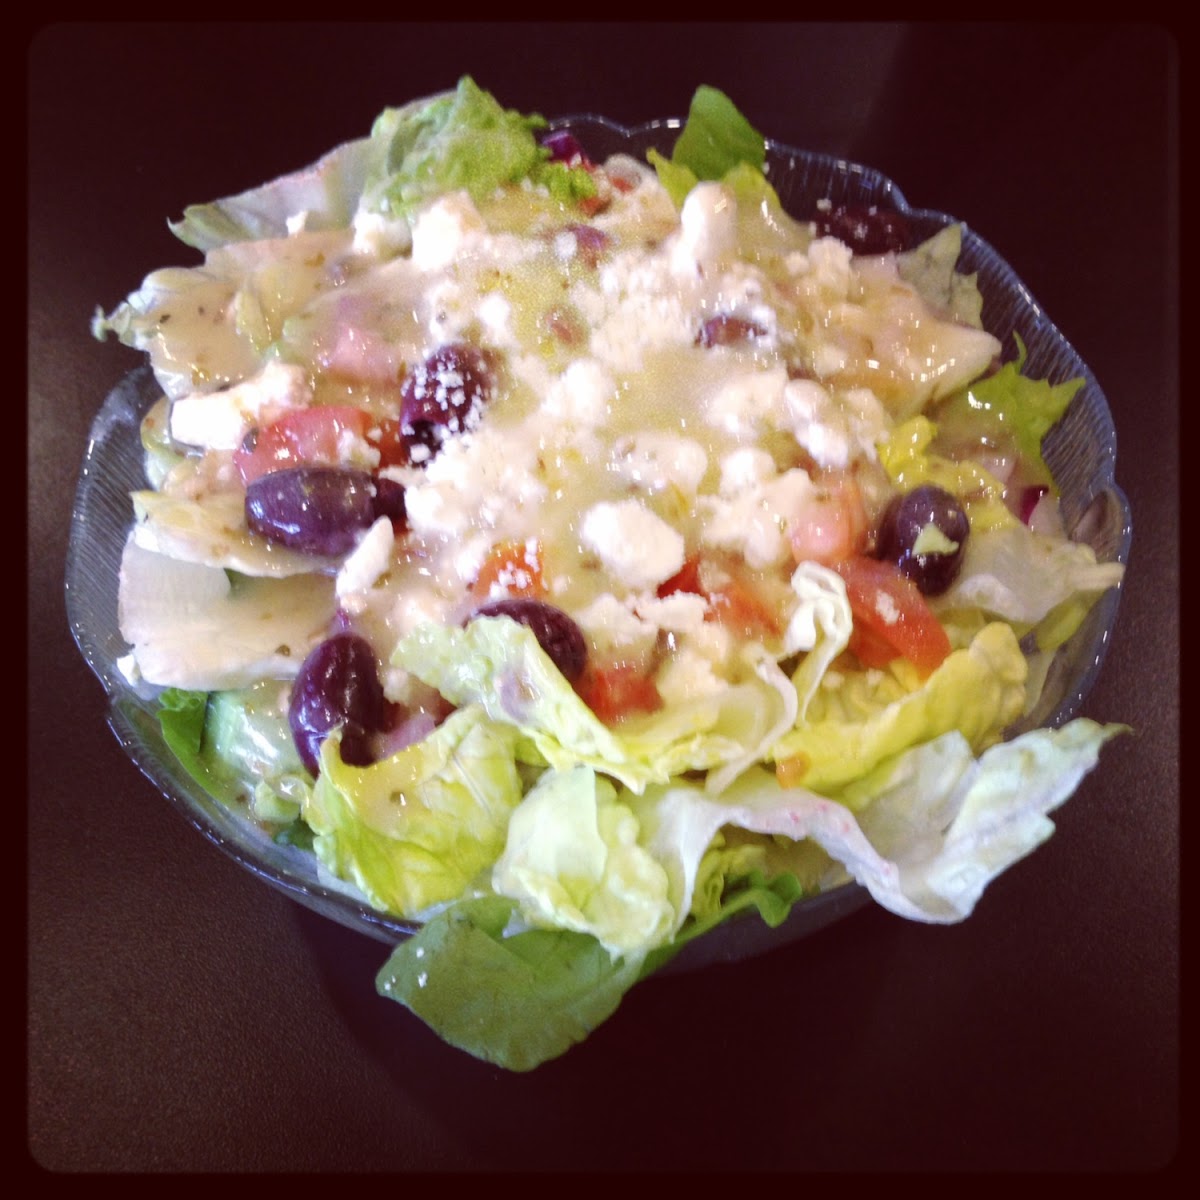 Small Greek Salad ( where are the beets?)